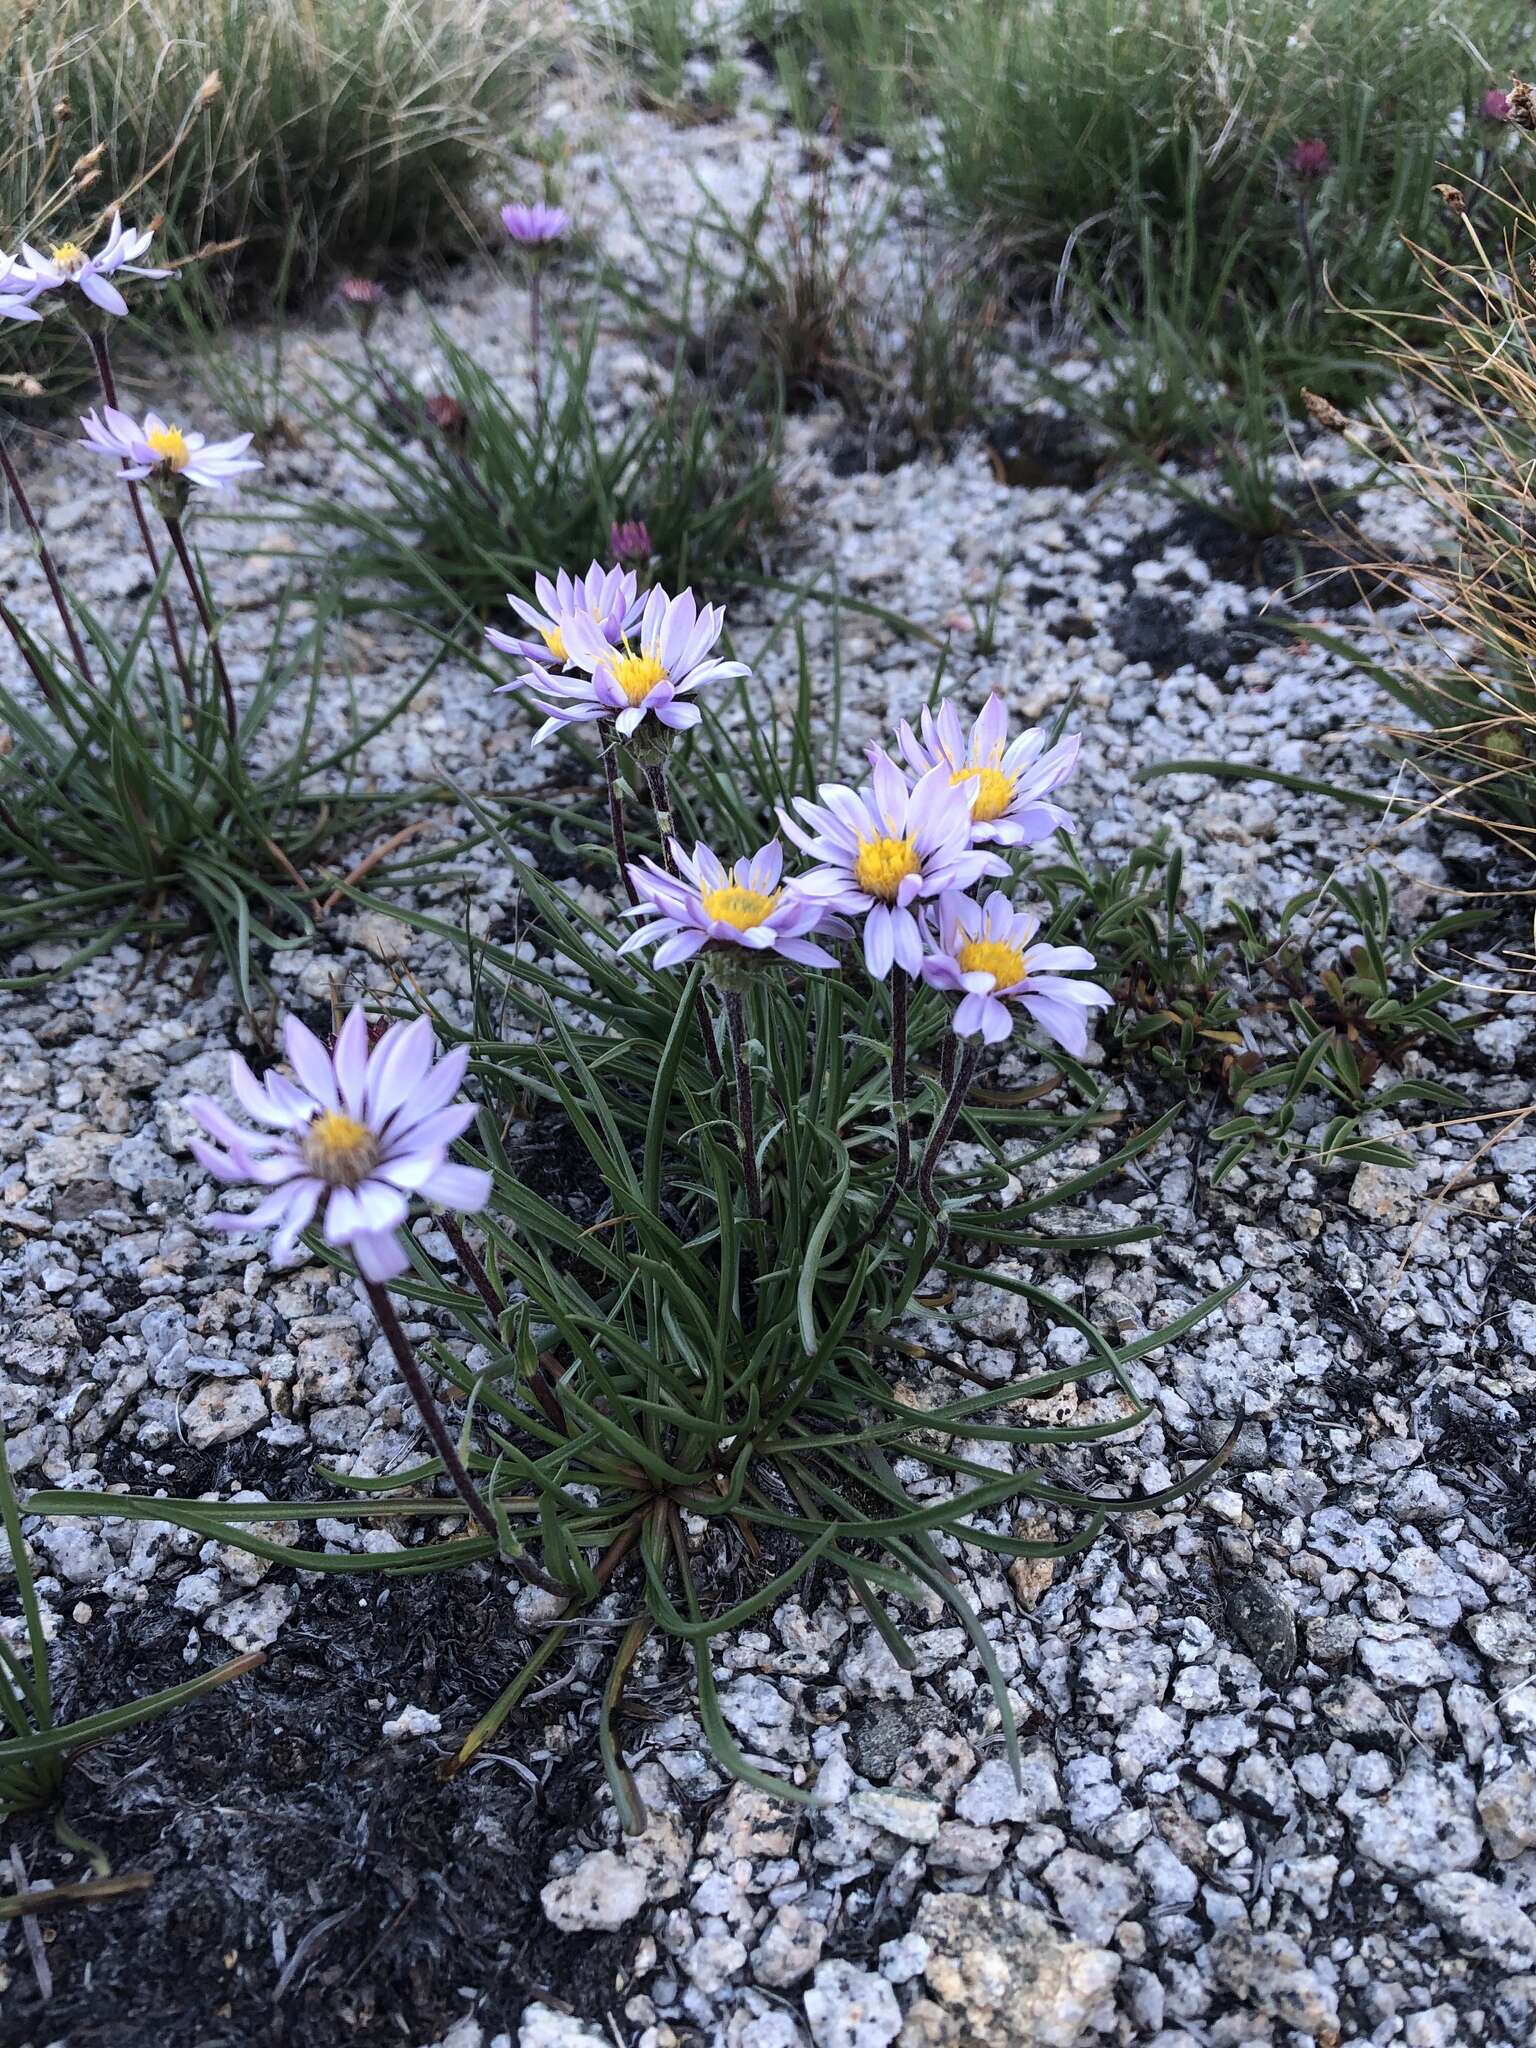 Image of tundra aster